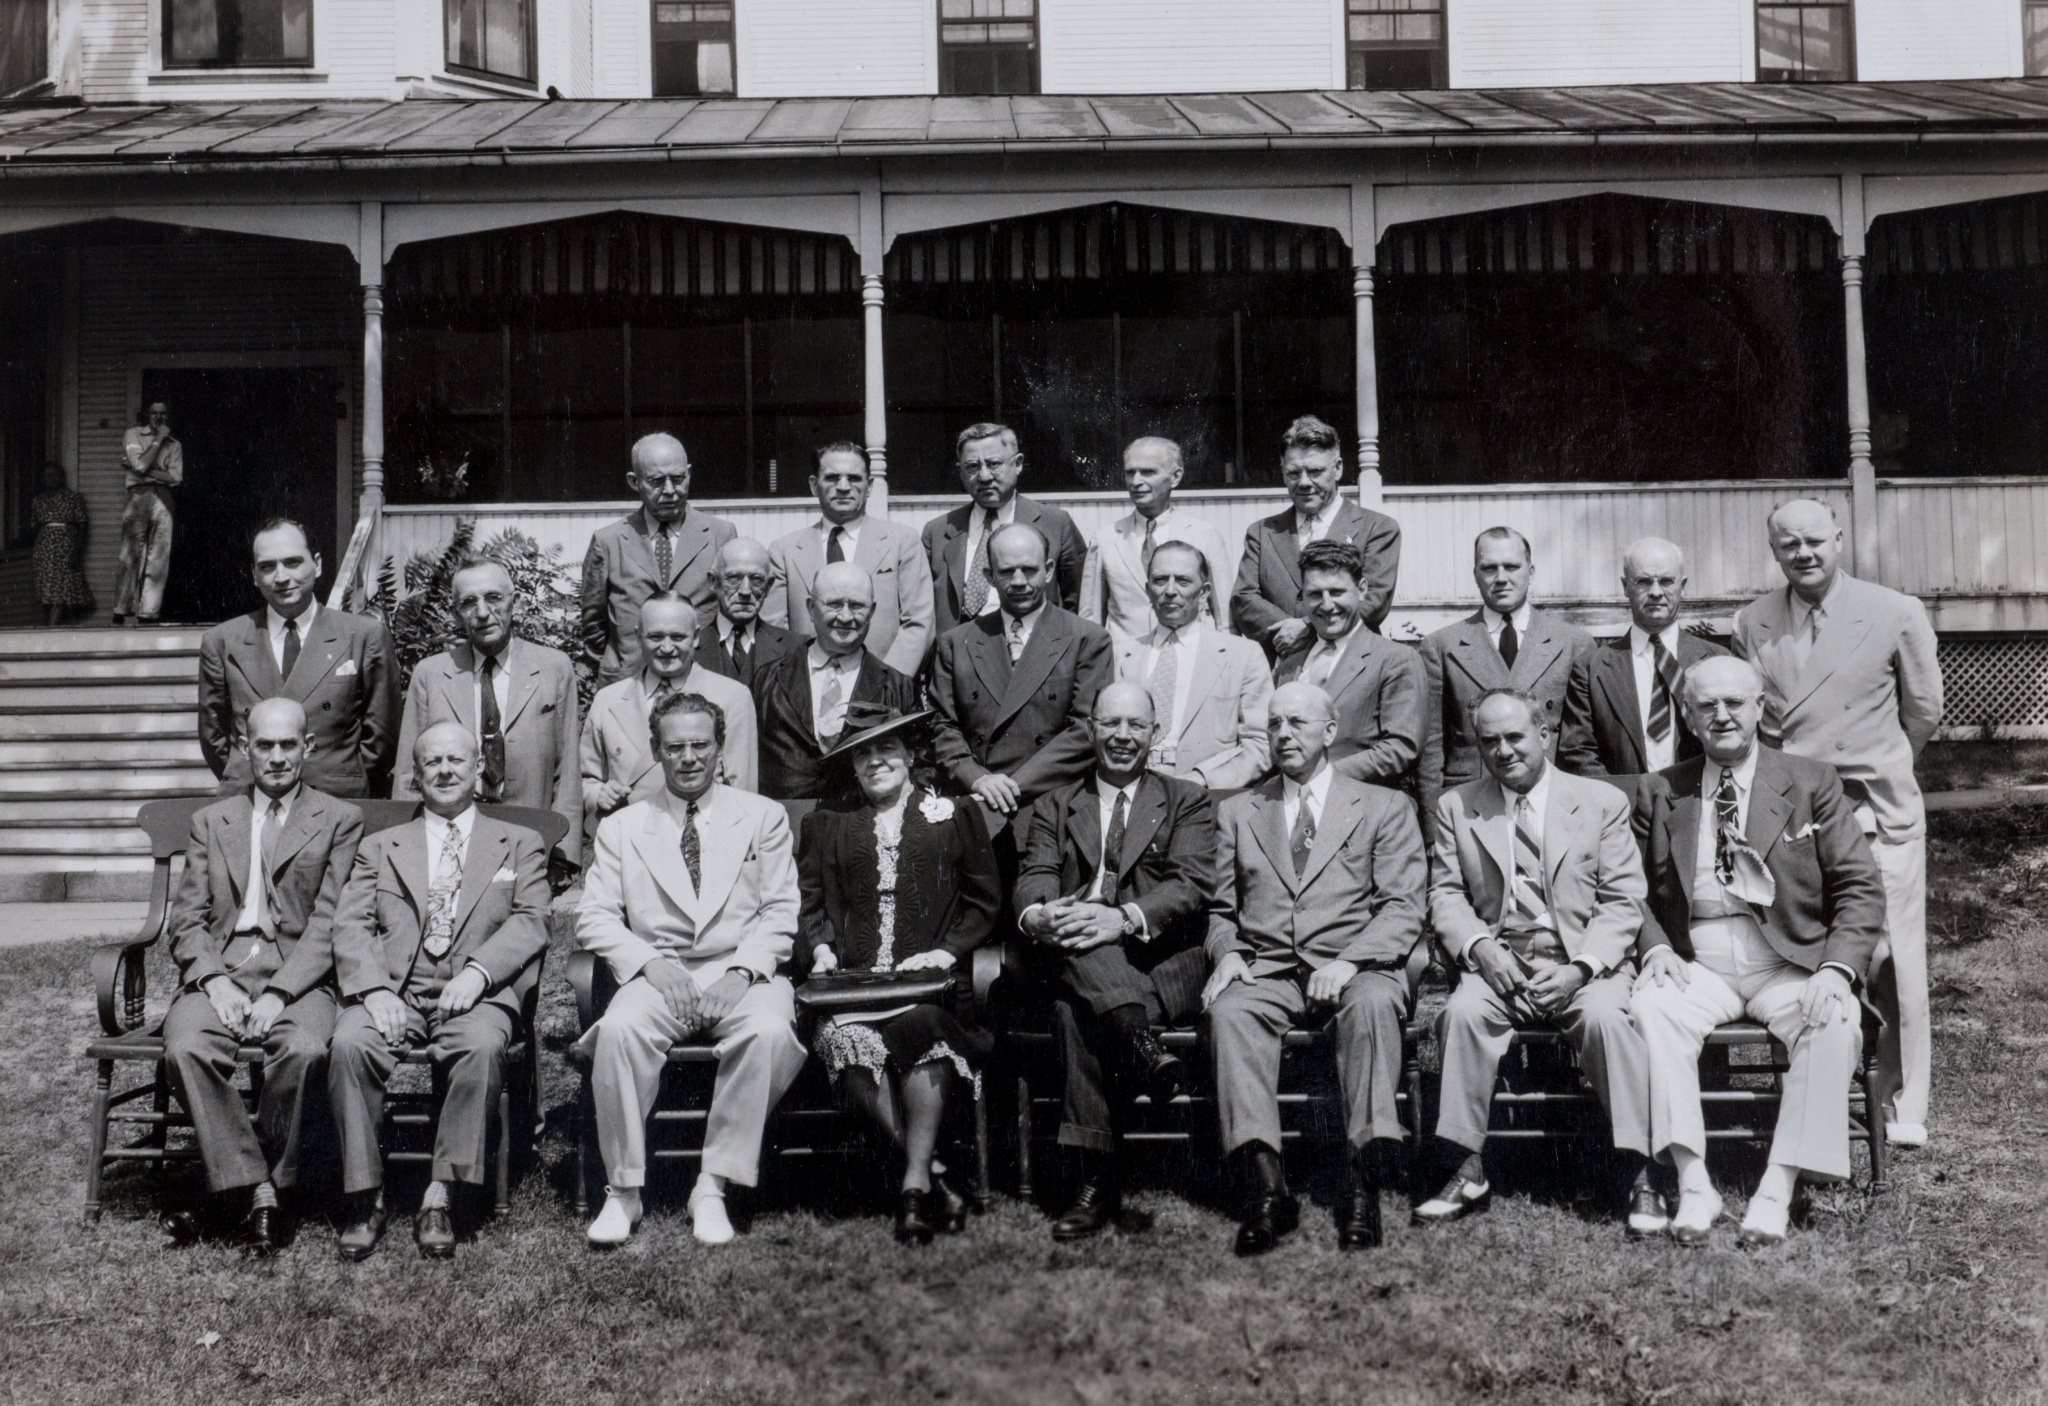 Attendees of the Winona Lake Conference, including Homer Rodeheaver and Dr. Bob Jones Jr., c. 1950